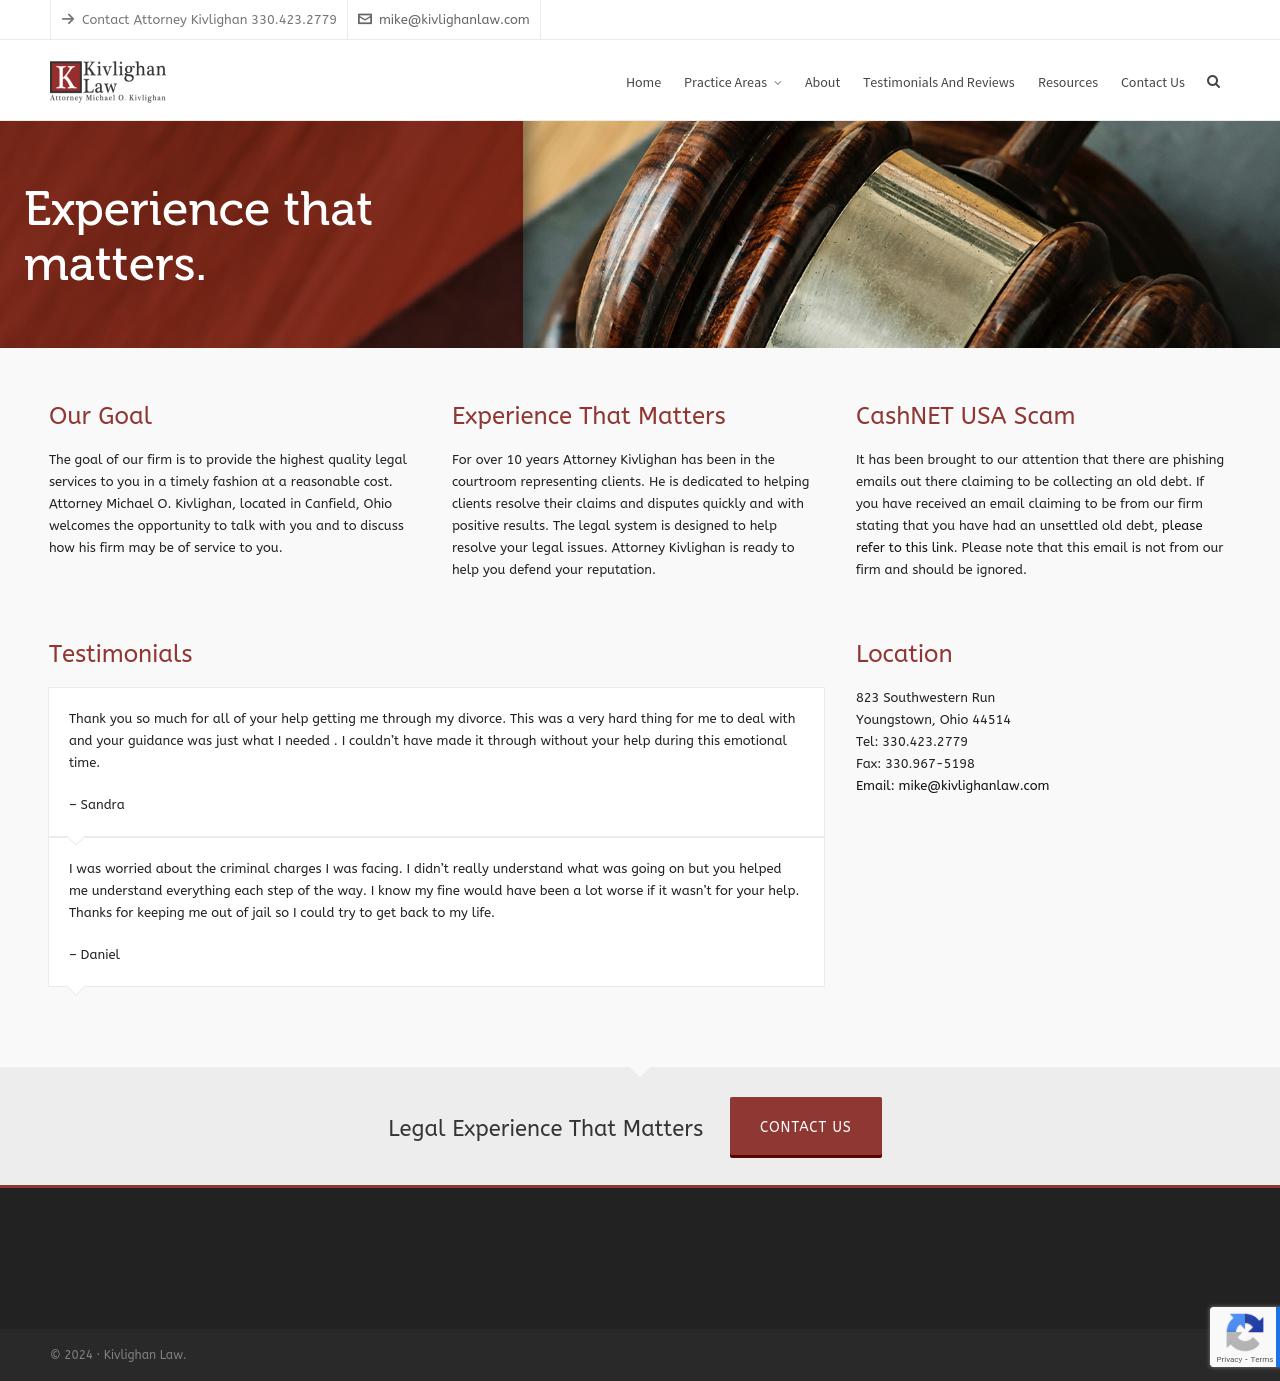 Michael O. Kivlighan Attorney & Counselor at Law - Canfield OH Lawyers